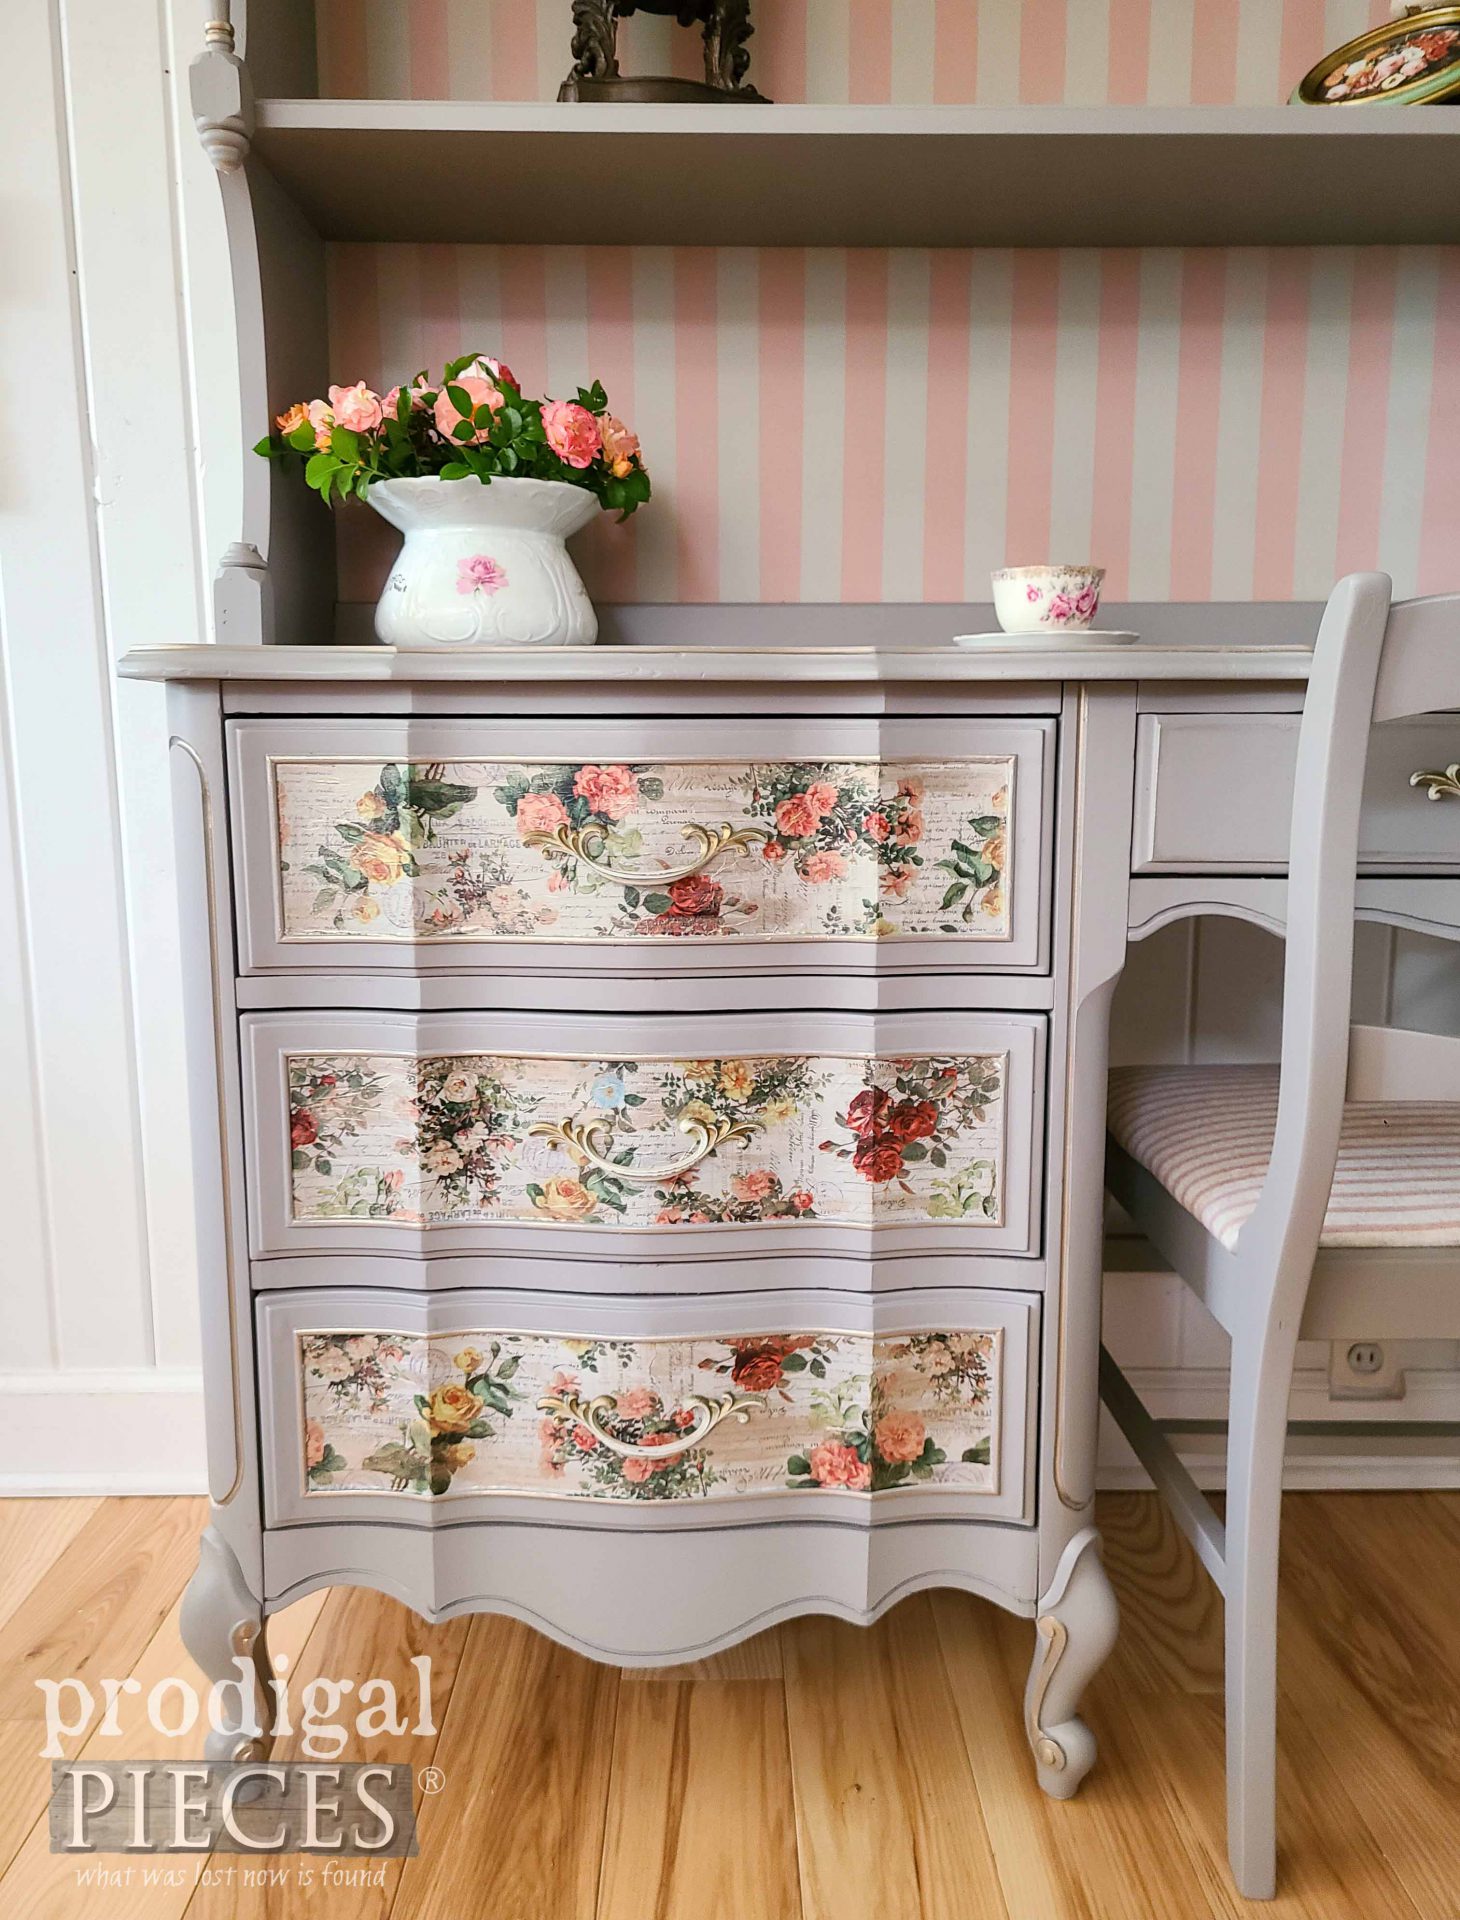 DIY Decoupaged Rose Drawer Fronts on Desk by Larissa of Prodigal Pieces | prodigalpieces.com #prodigalpieces #diy #furniture #french #vintage